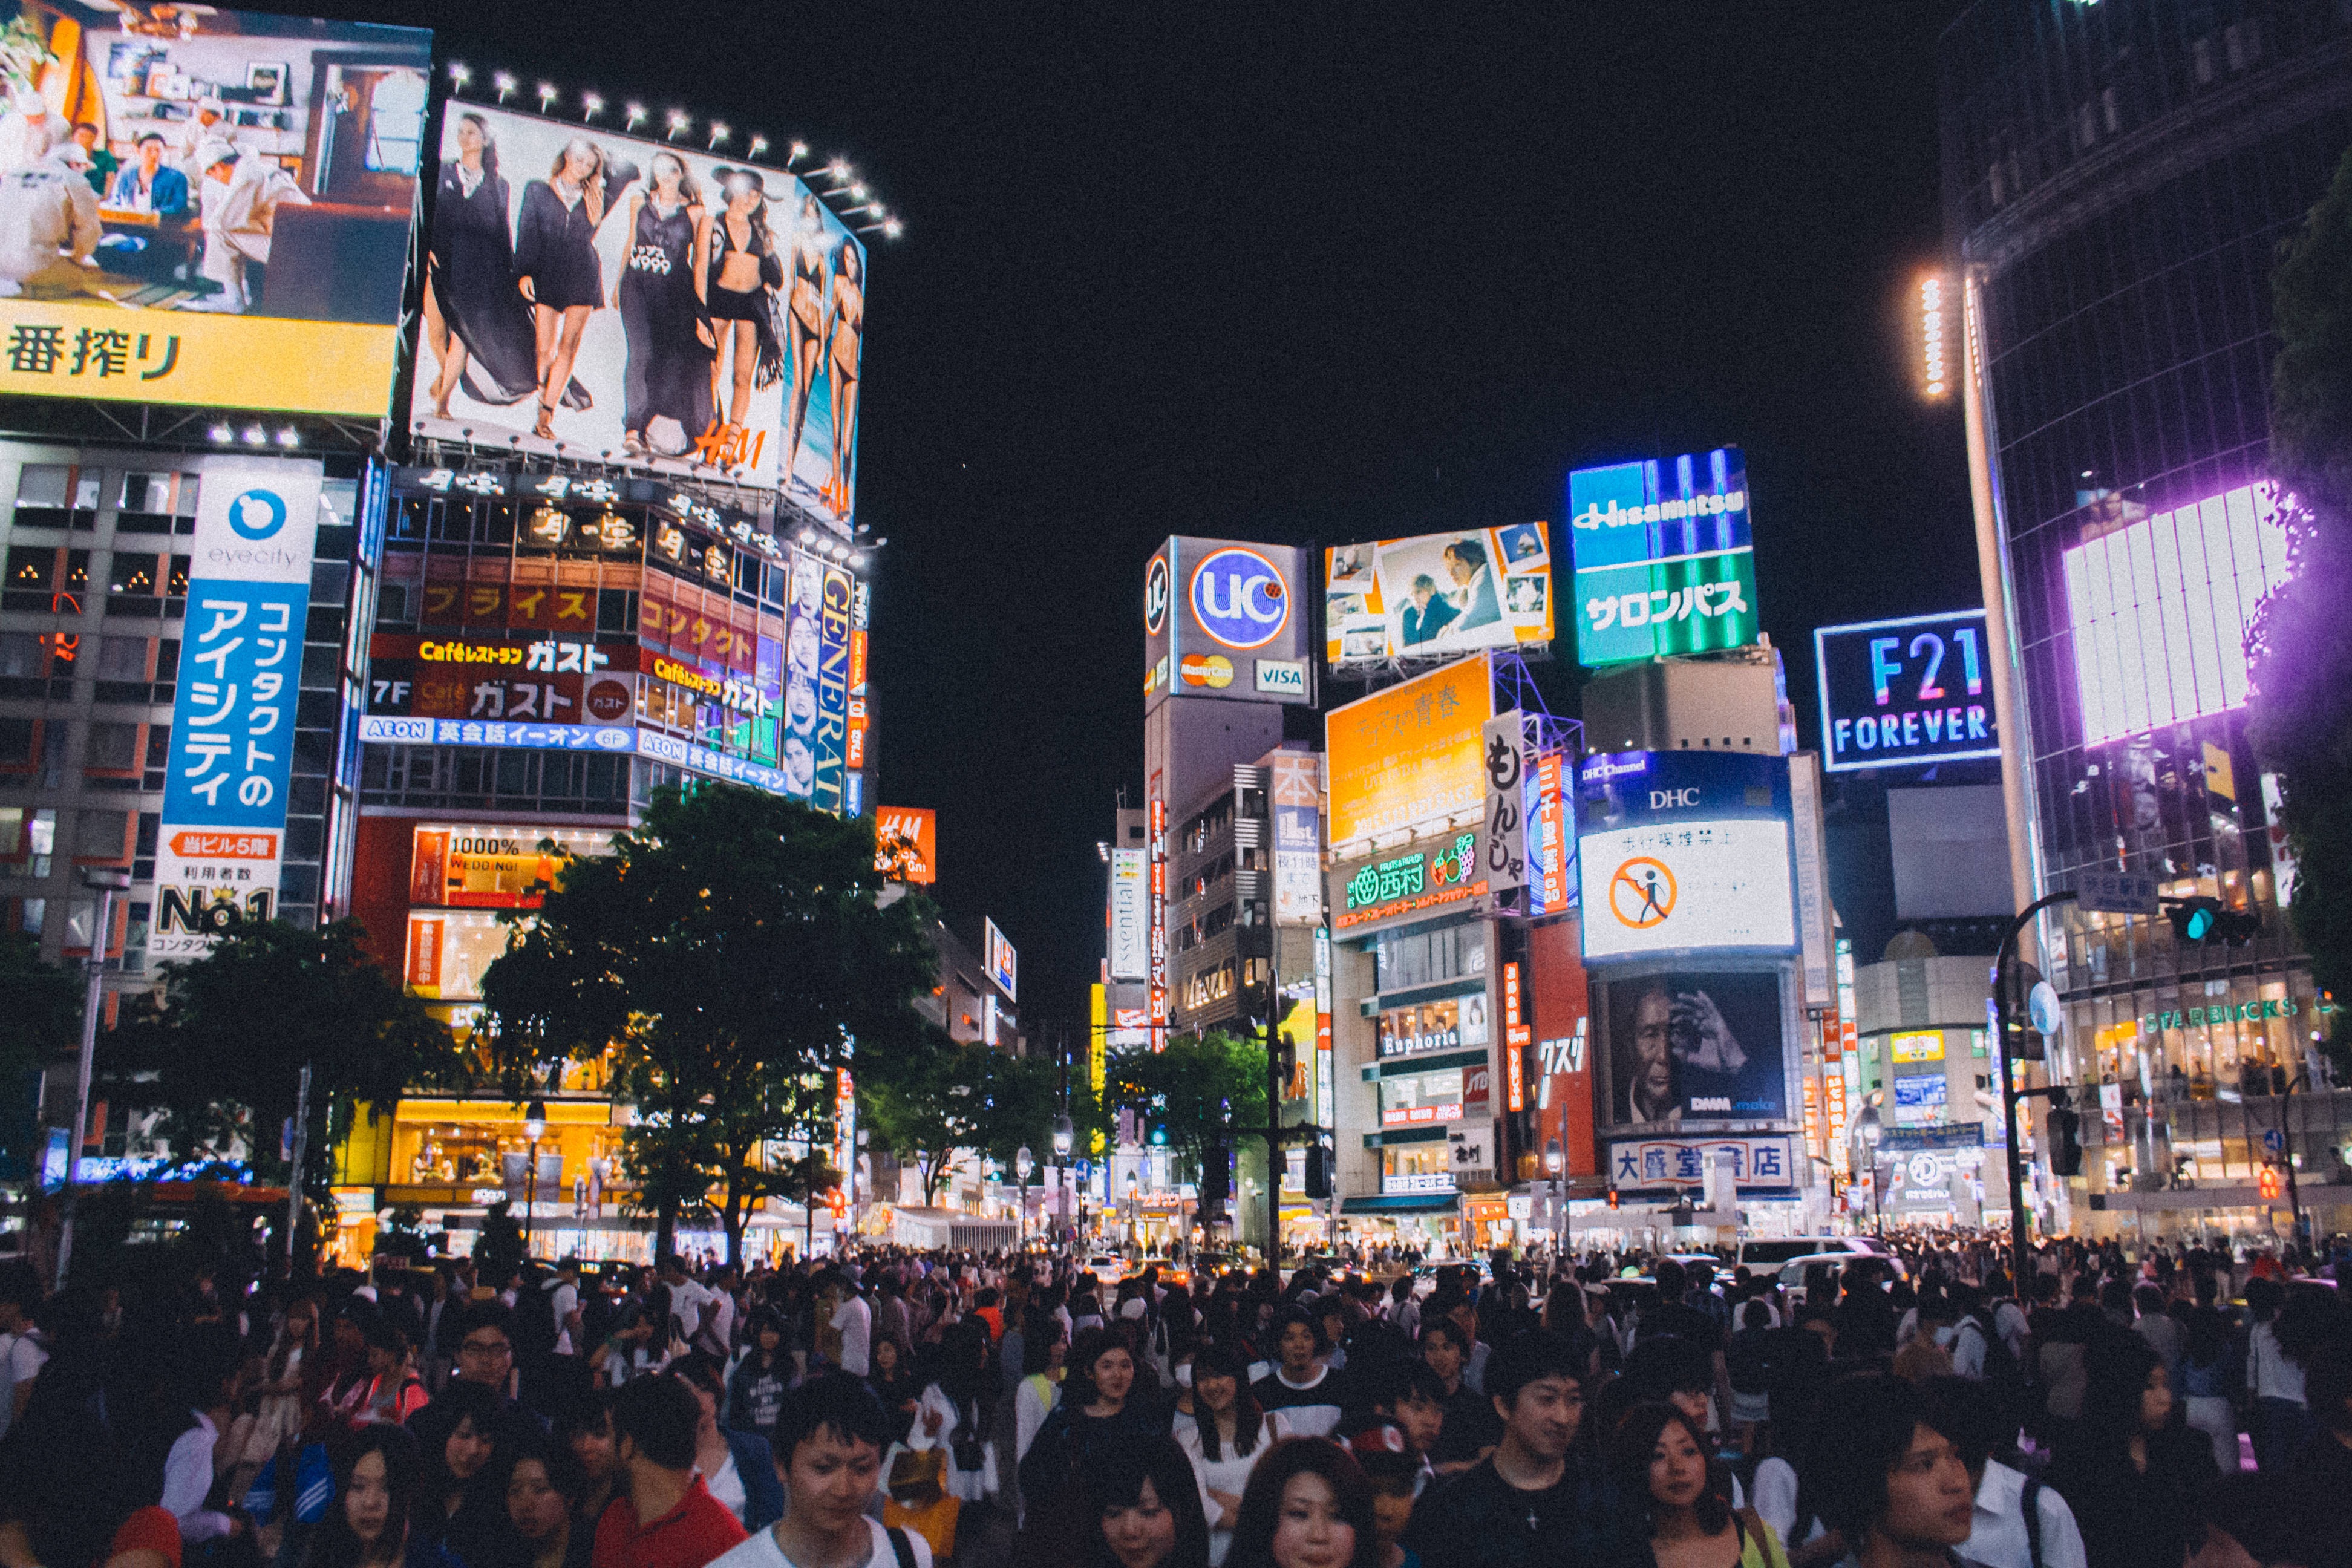 Lots of people and billboards at the shibuya crossing in Tokyo free image download